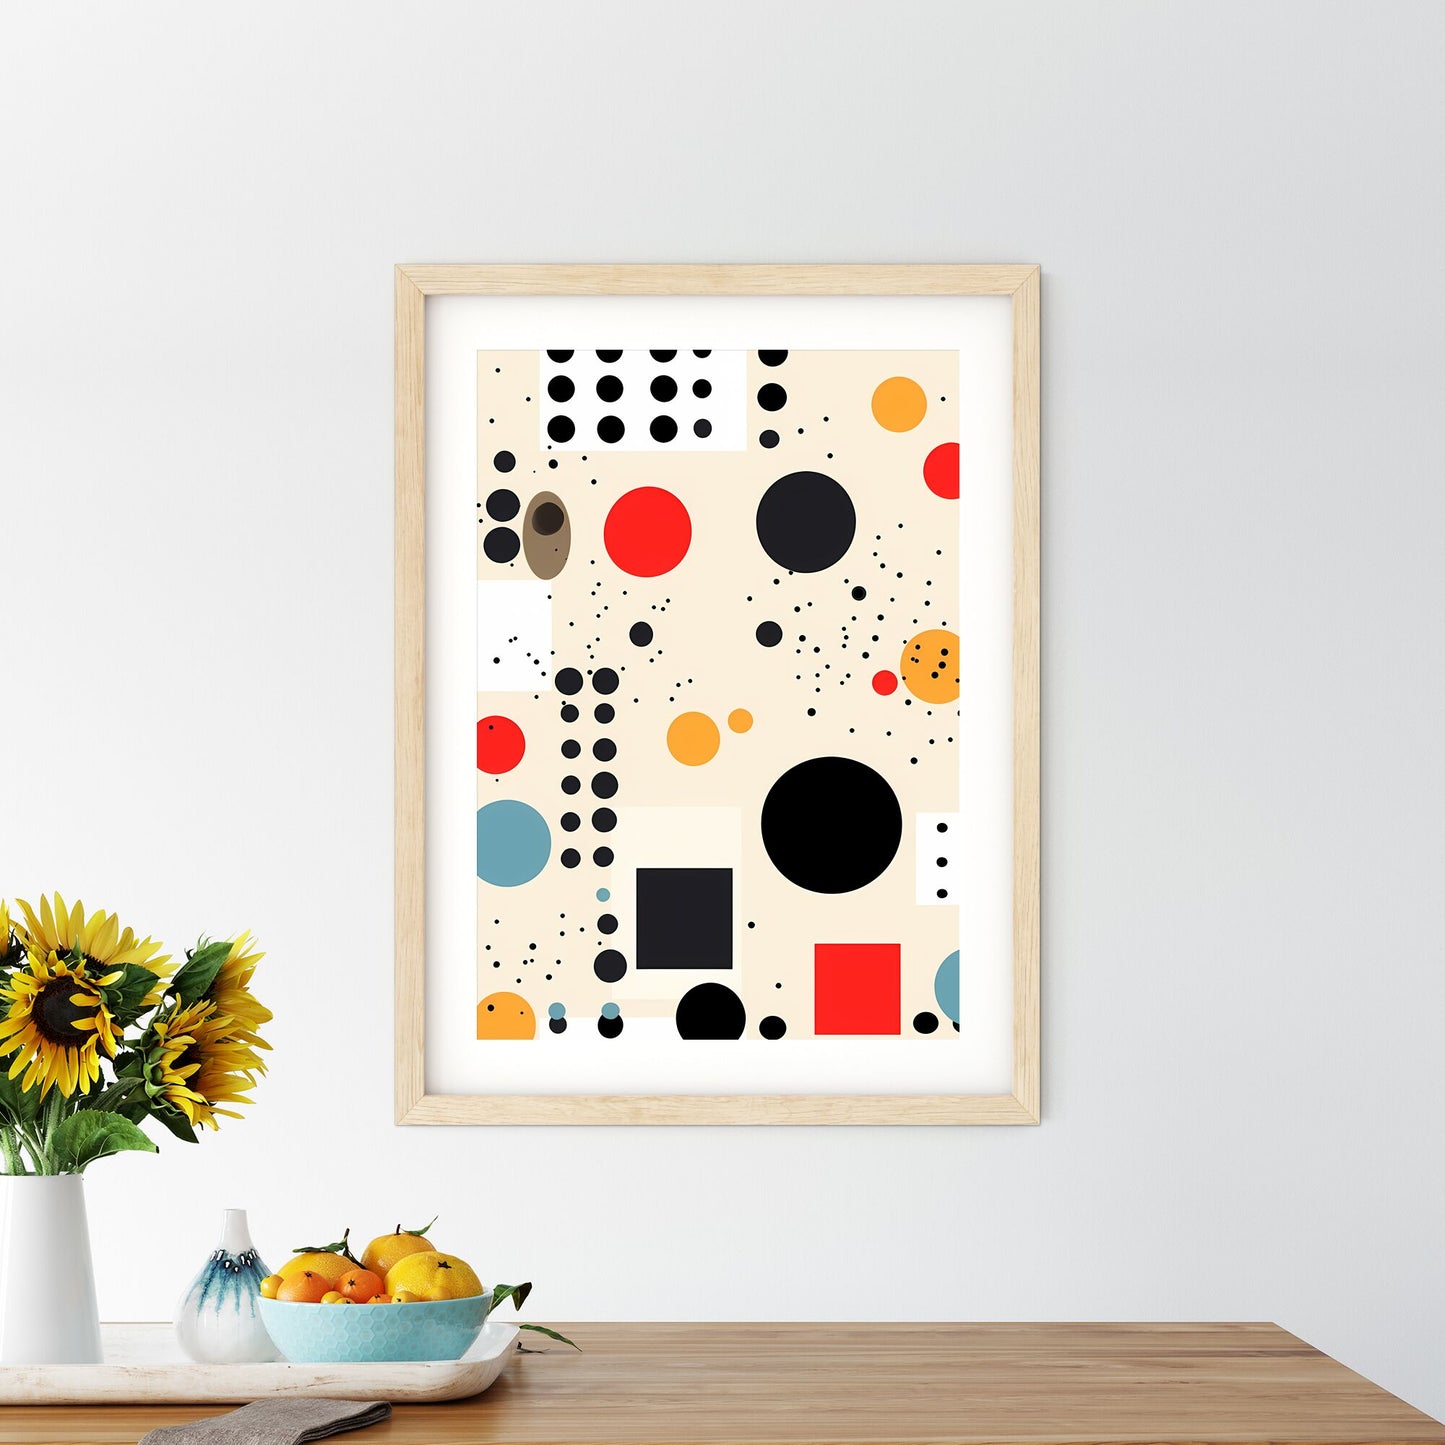 Pattern Of Different Colored Circles And Squares Art Print Default Title